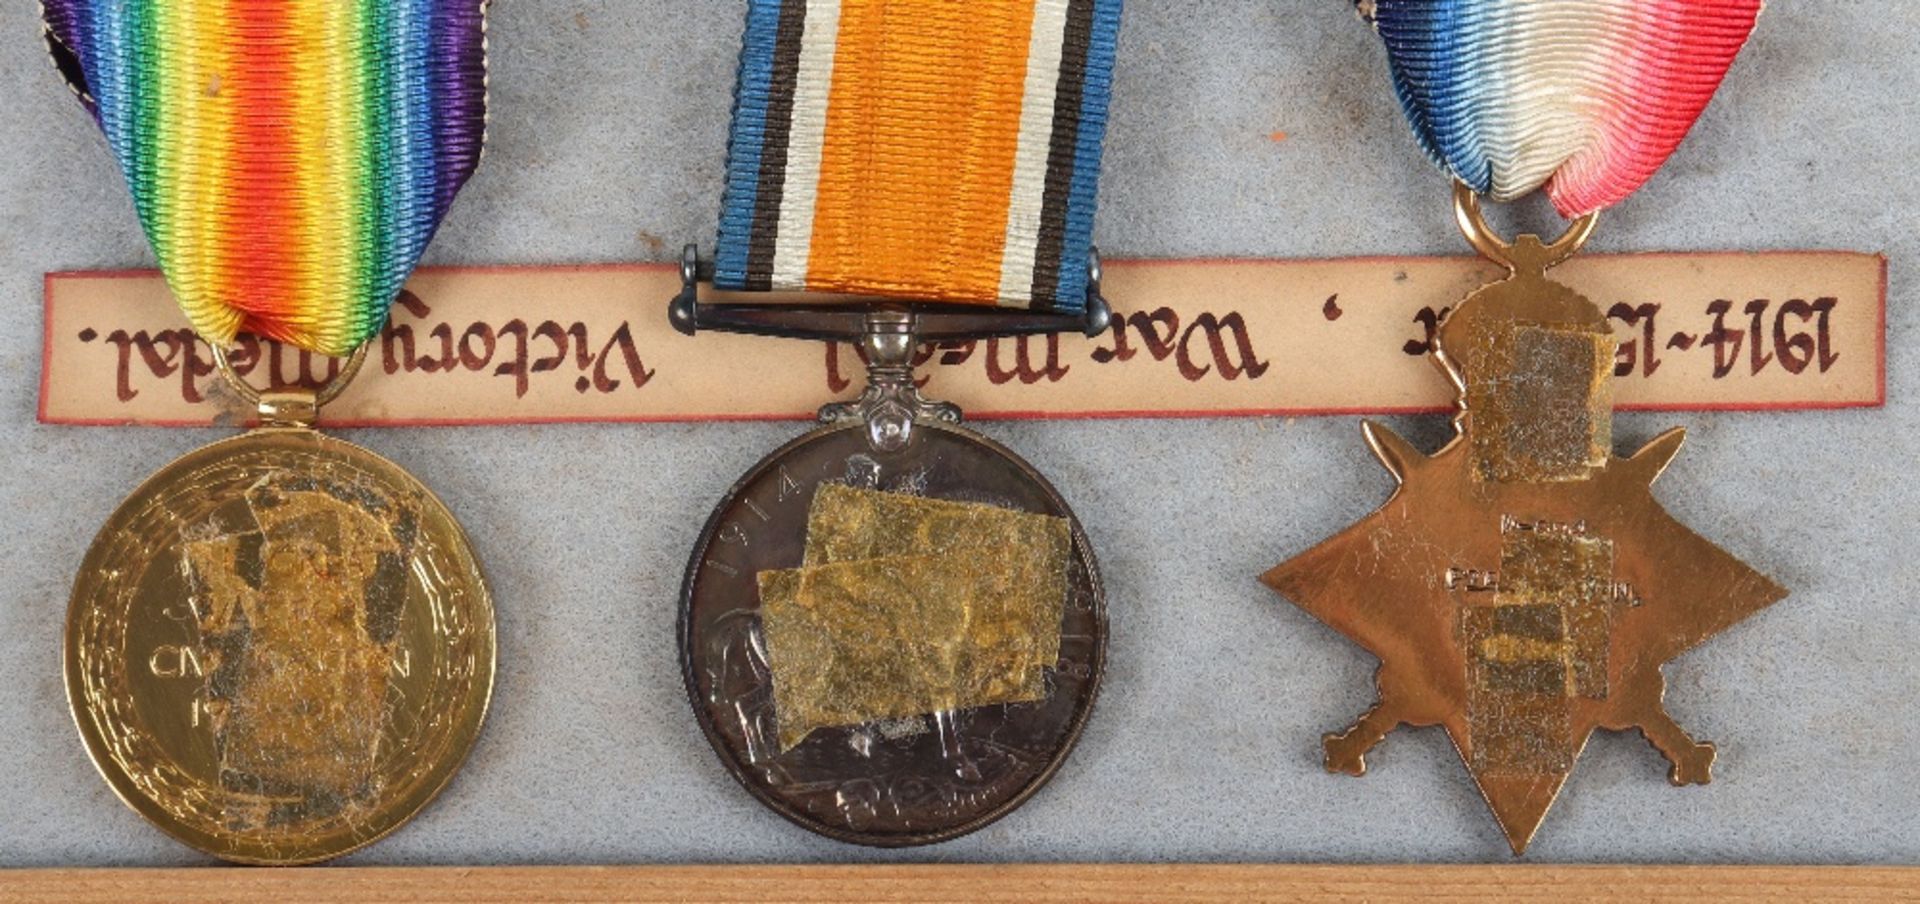 WW1 13th (Wirral) Battalion Cheshire Regiment 1916 Casualty Medal Trio & Plaque Group - Image 10 of 10